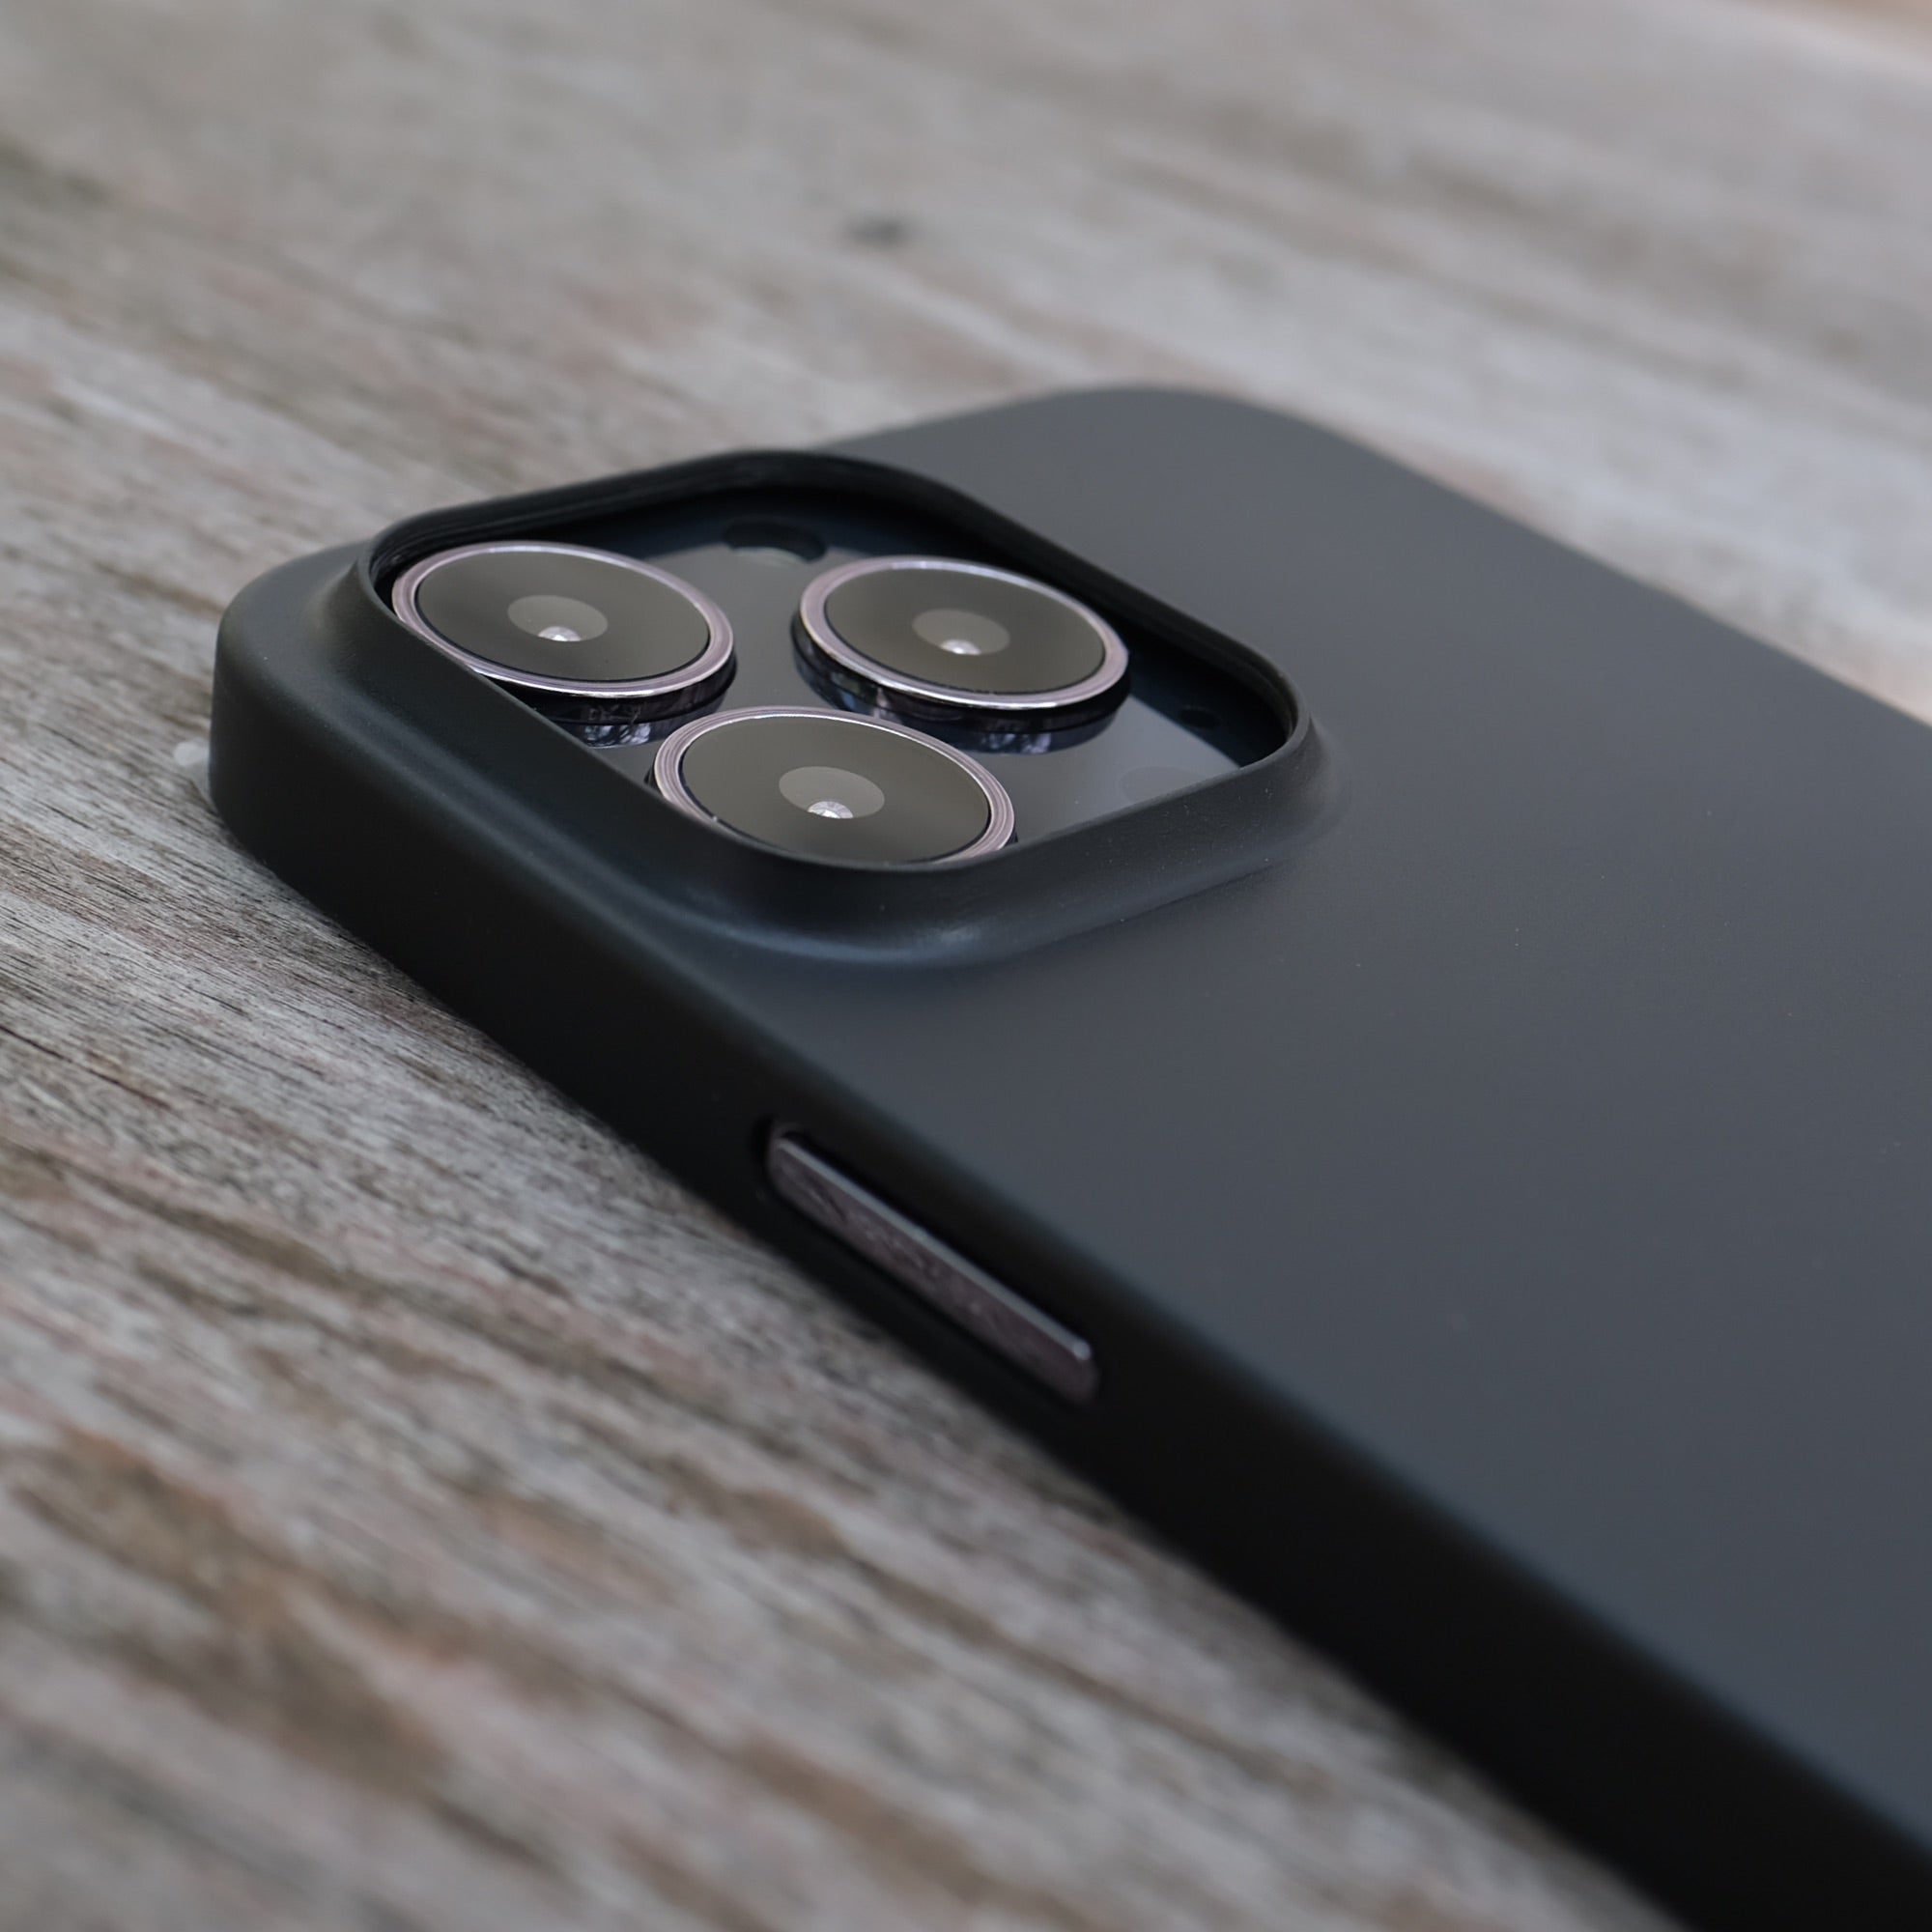 Apple iPhone 13 Pro and iPhone 13 Pro Max may come in the darkest black  colour